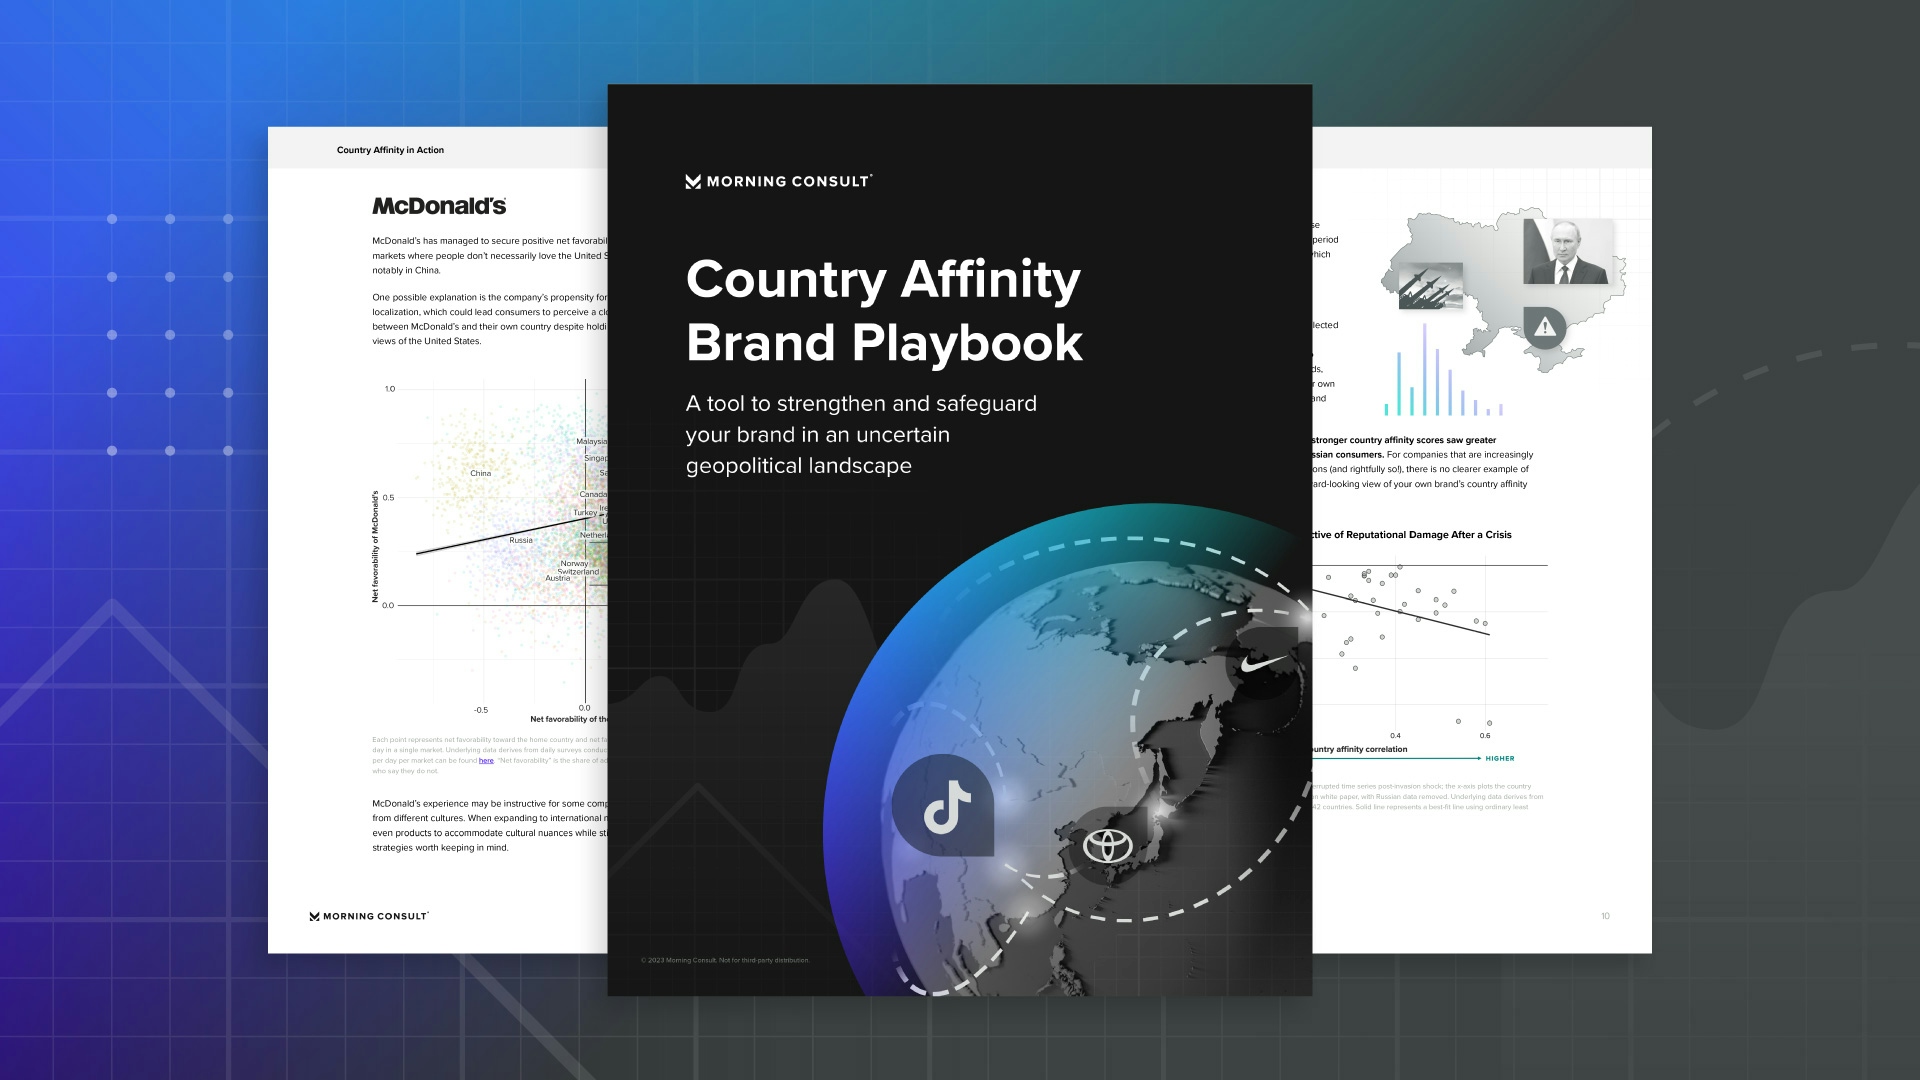 Download the Country Affinity Brand Playbook